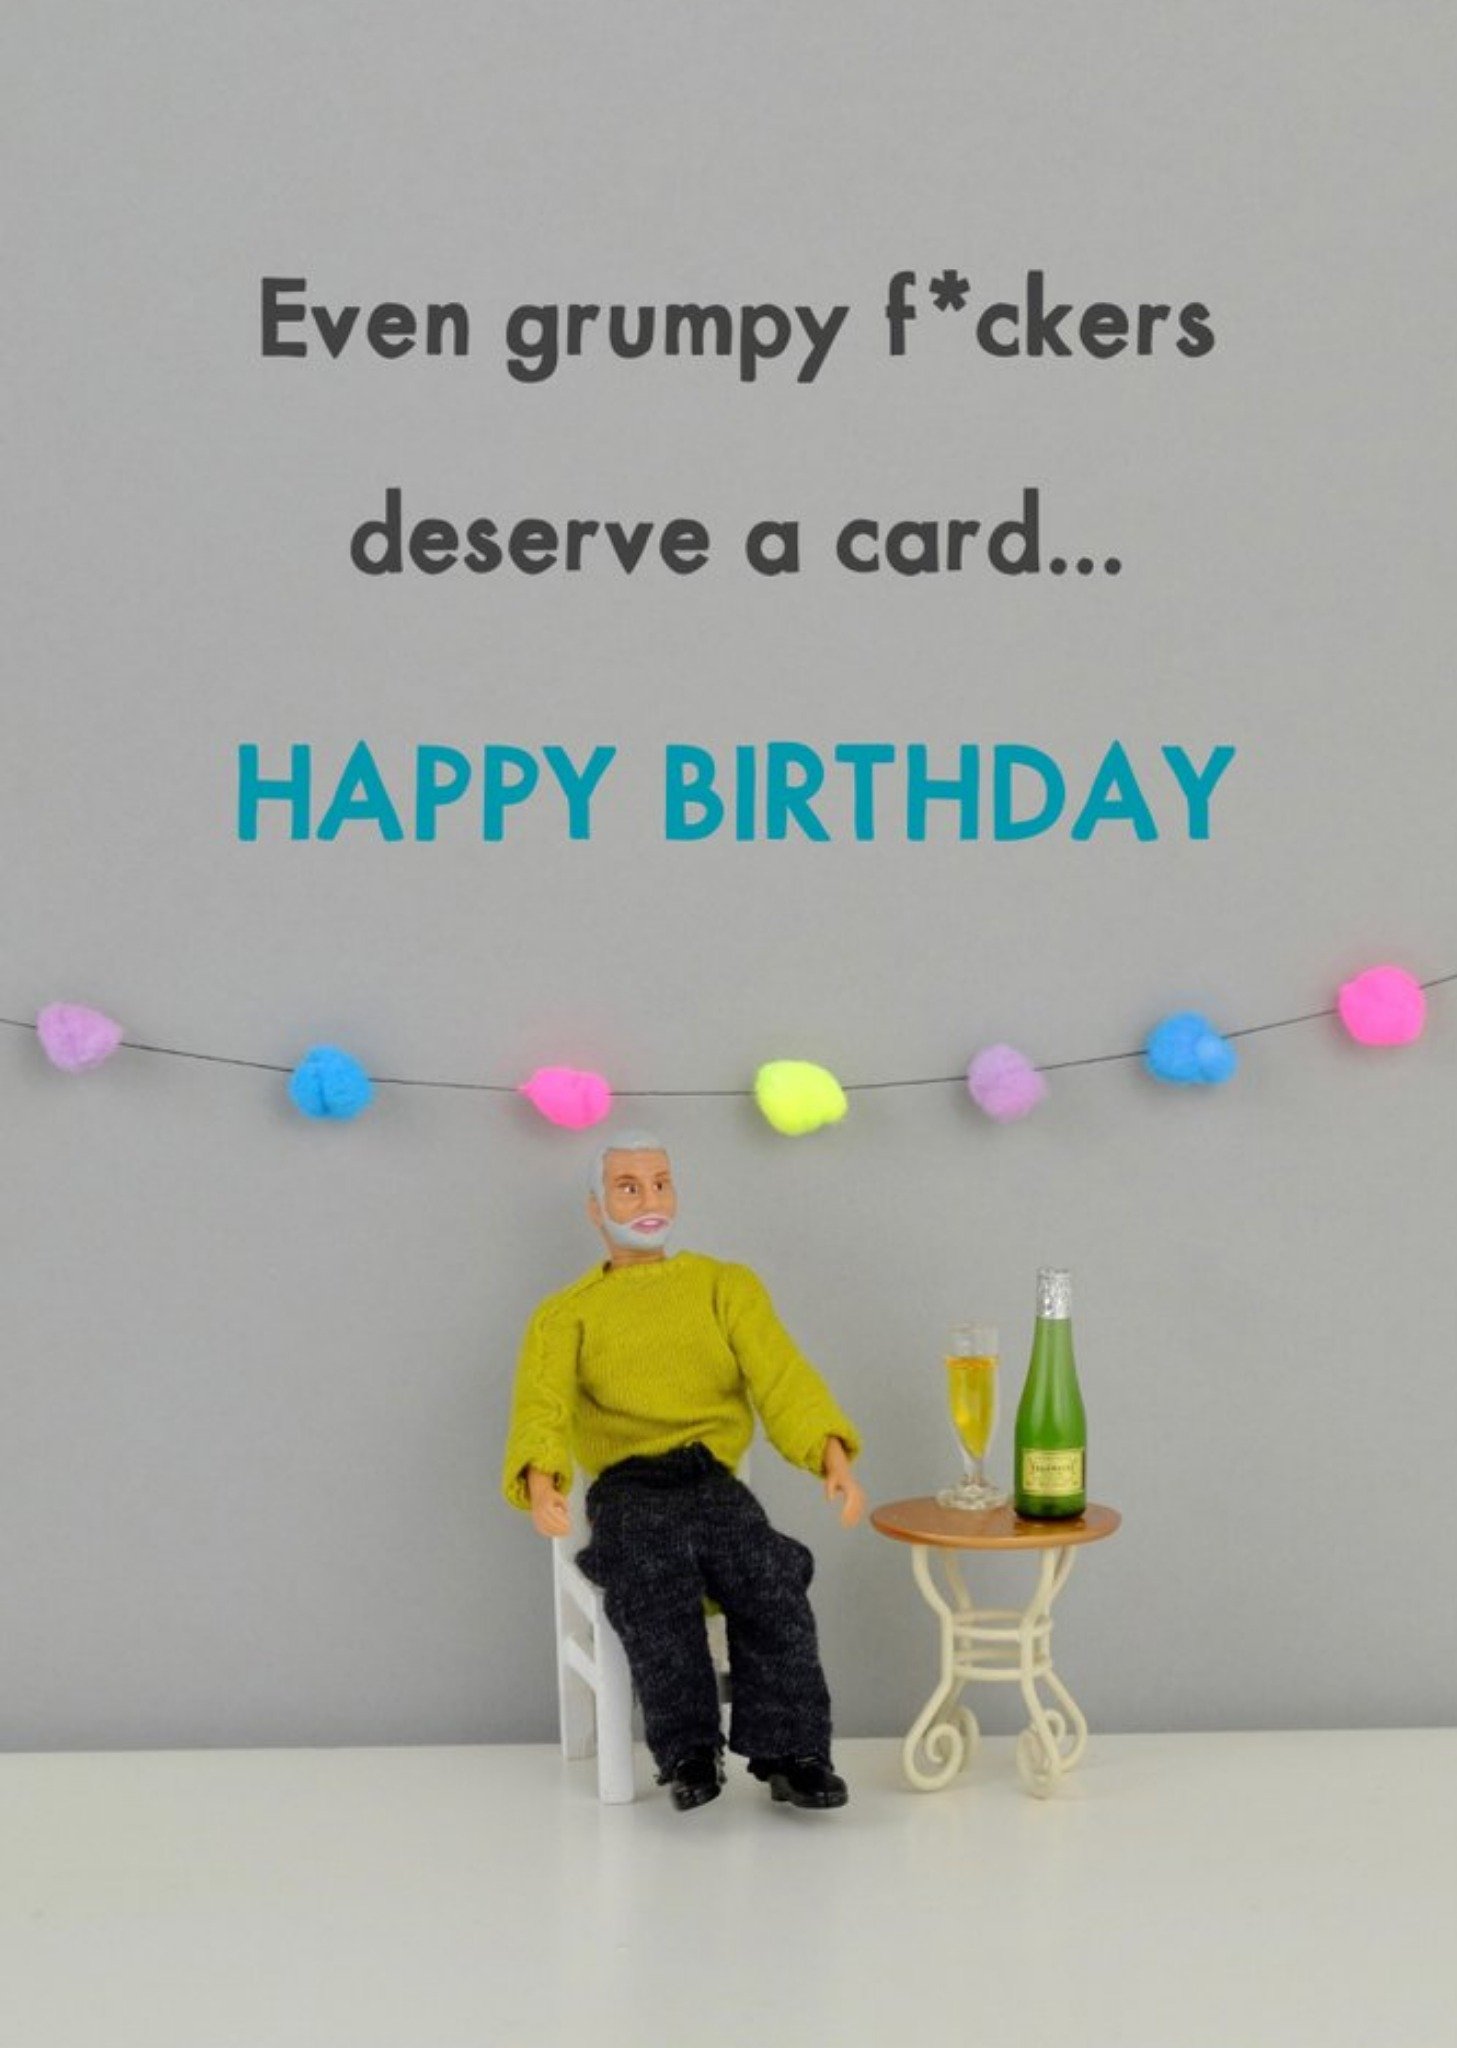 Bold And Bright Funny Dolls Even Grumpy People Deserve A Card Happy Birthday, Large